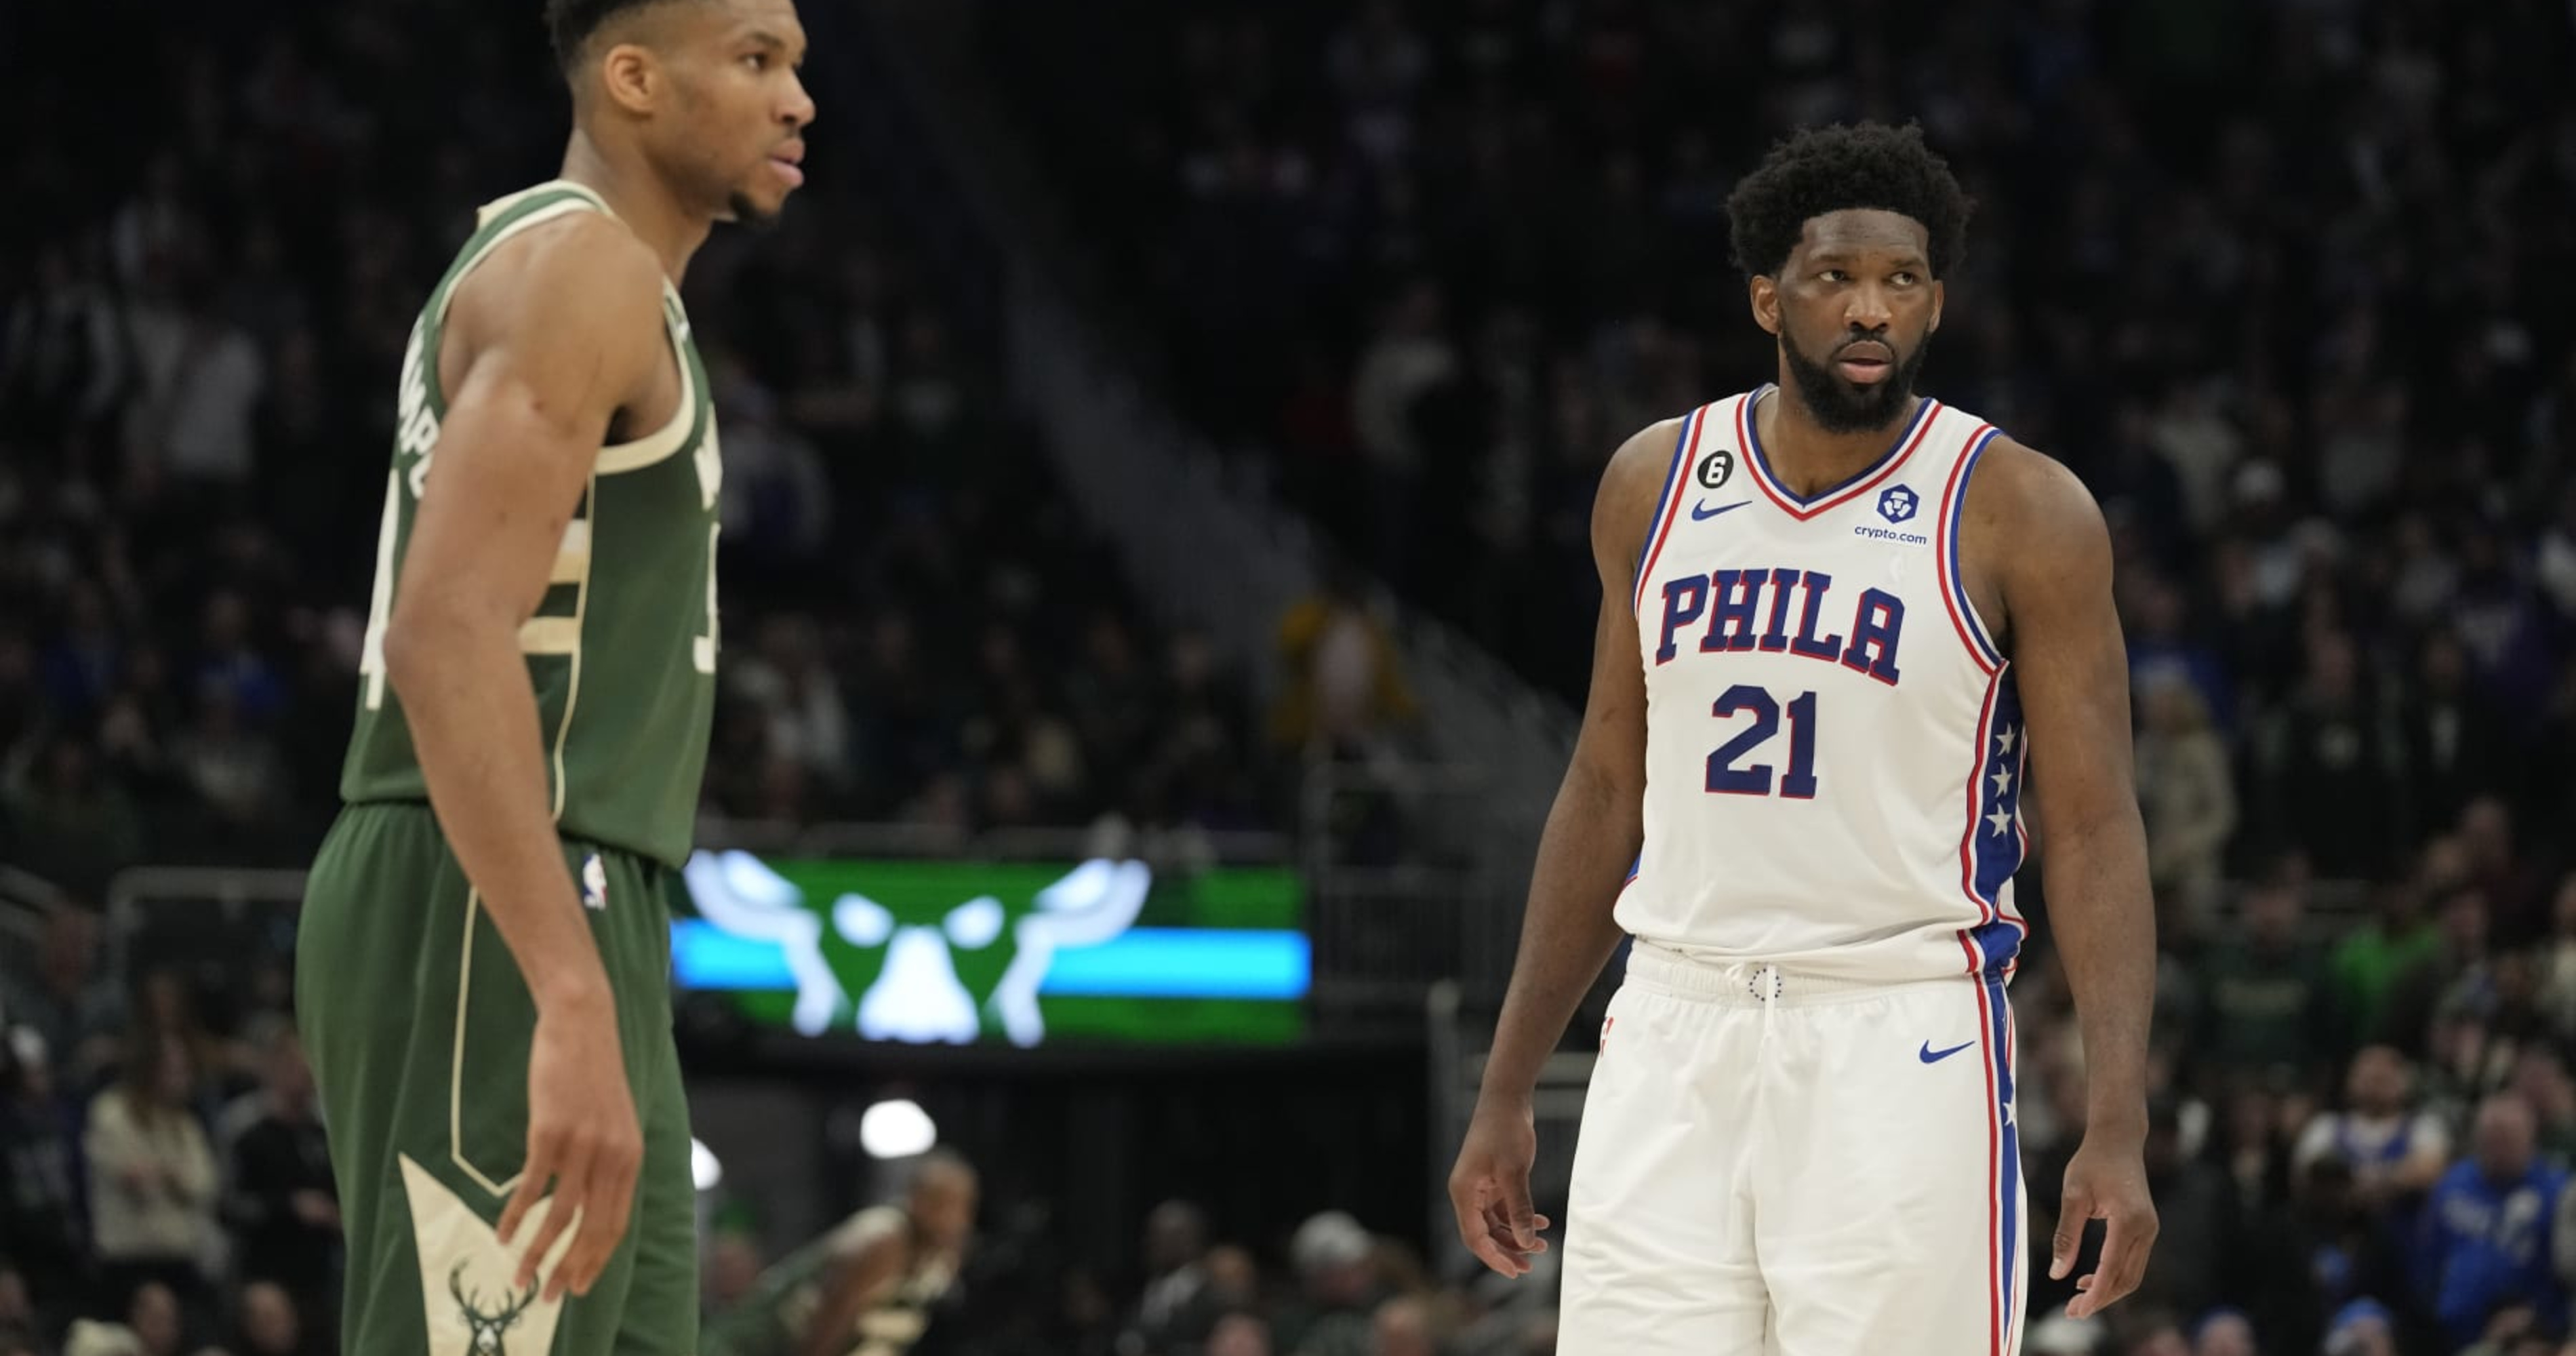 76ers vs. Nets score, result: Embiid leads Philly to victory in